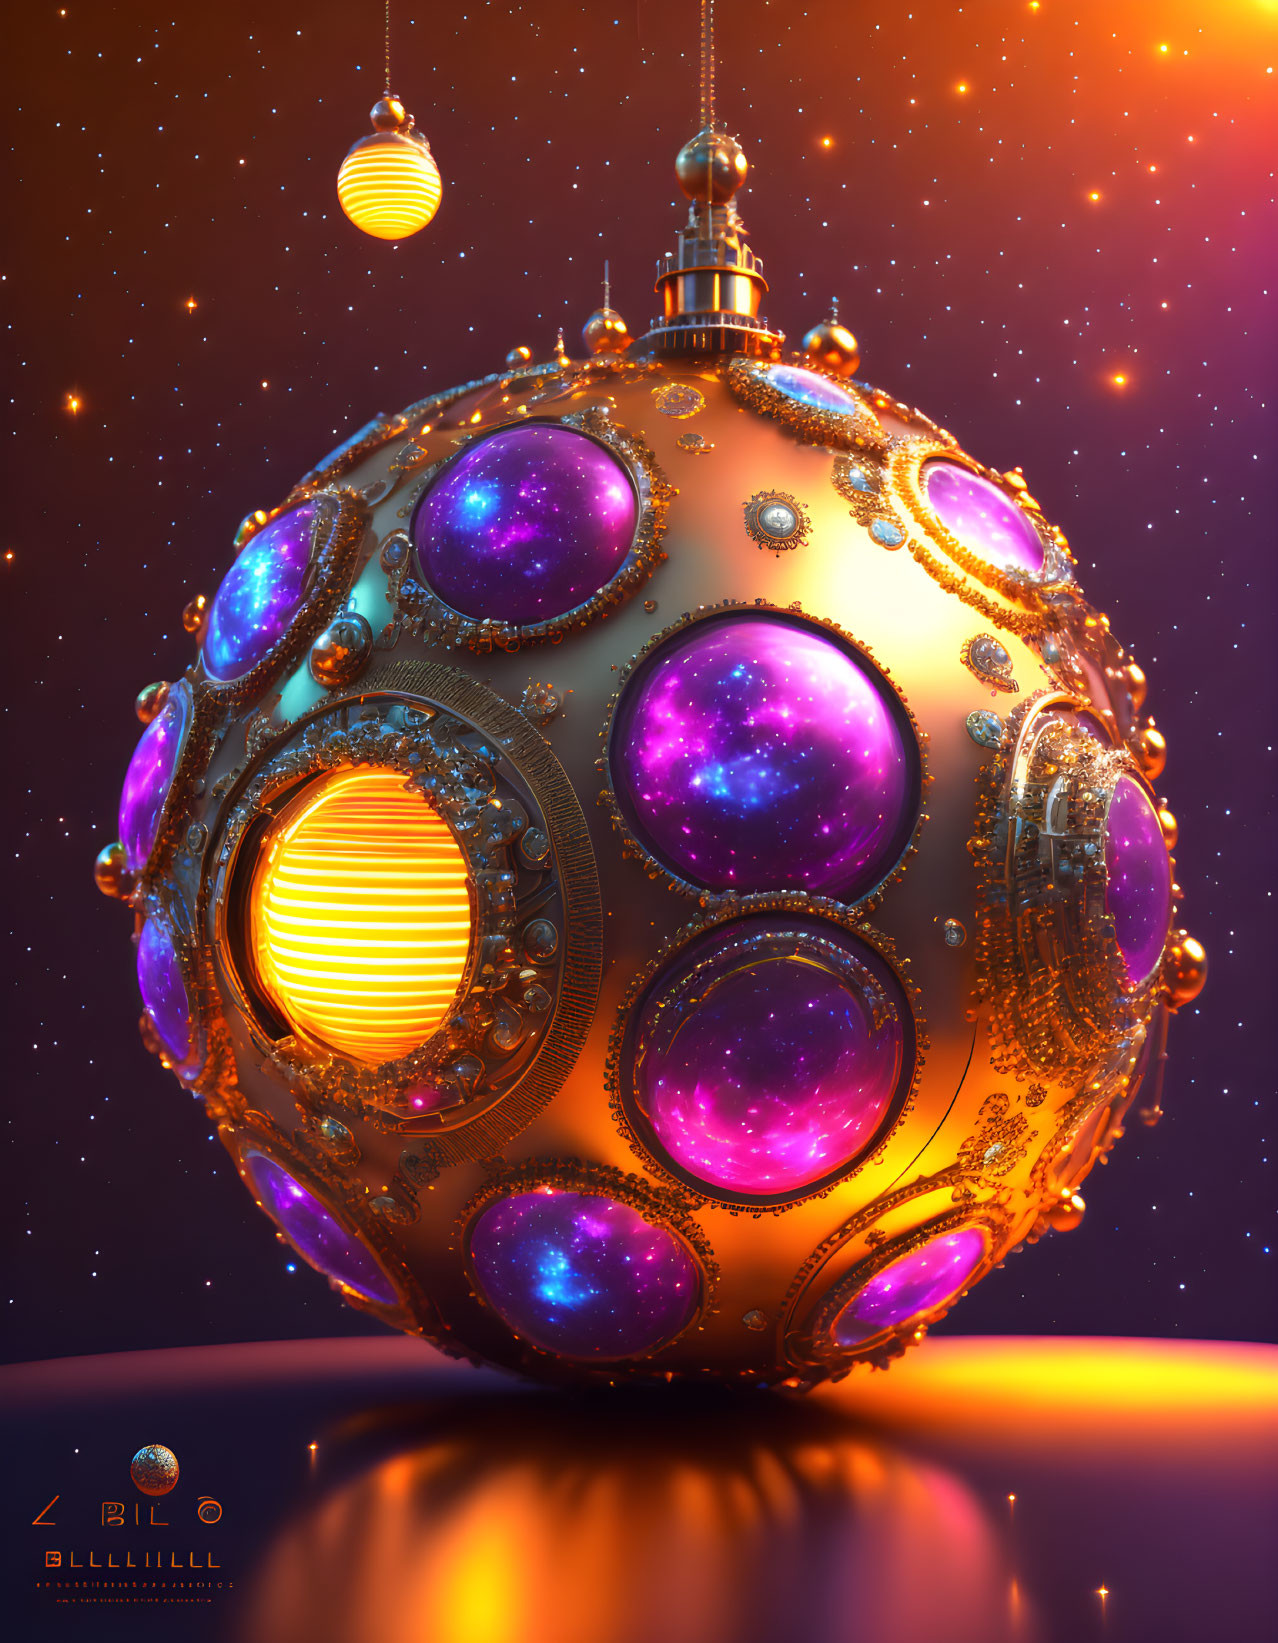 Futuristic orb with glowing purple spheres and golden patterns on cosmic backdrop